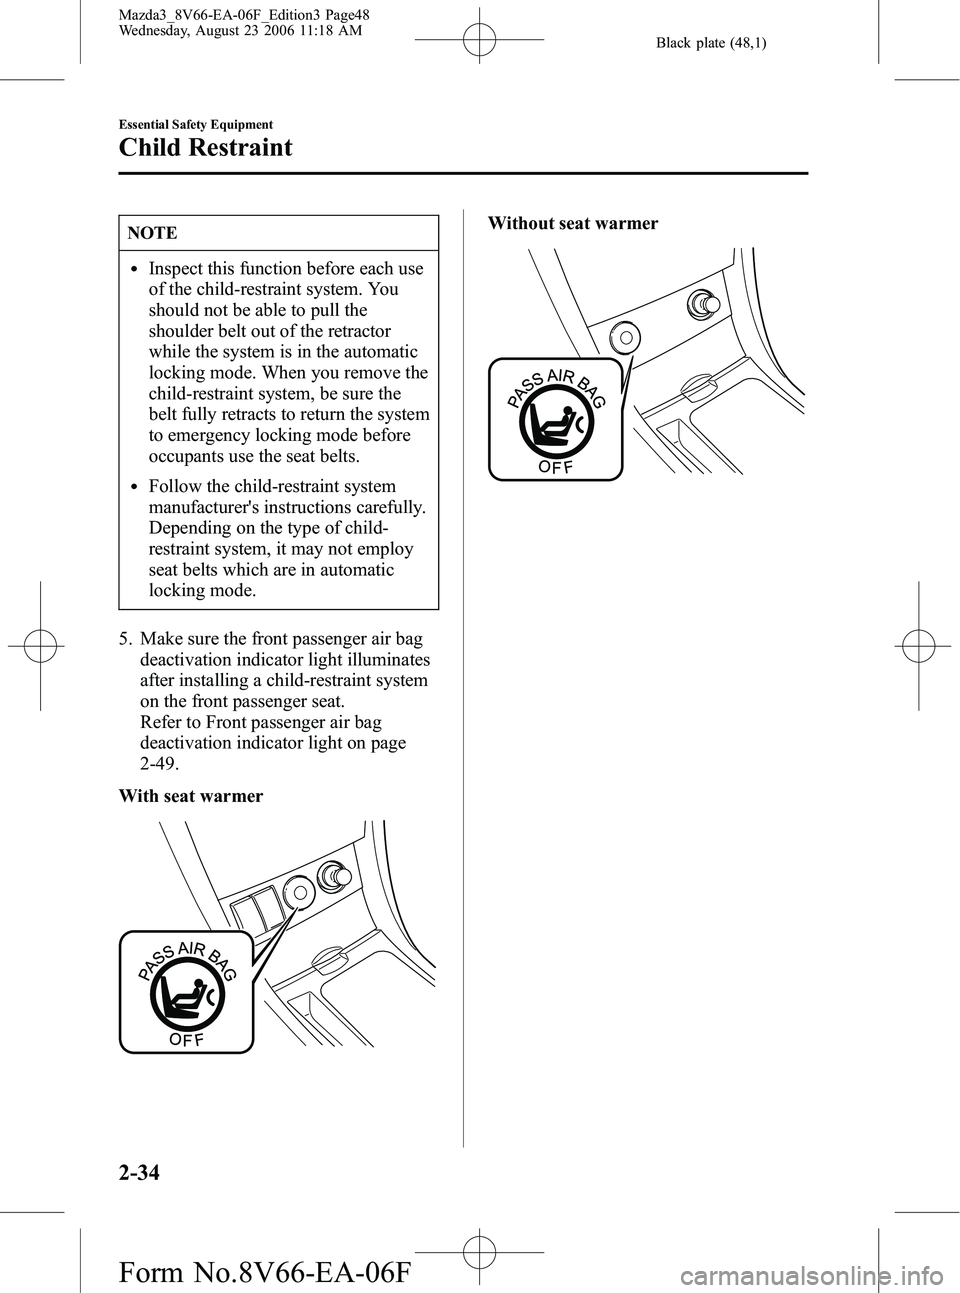 MAZDA MODEL 3 5-DOOR 2007 Service Manual Black plate (48,1)
NOTE
lInspect this function before each use
of the child-restraint system. You
should not be able to pull the
shoulder belt out of the retractor
while the system is in the automatic